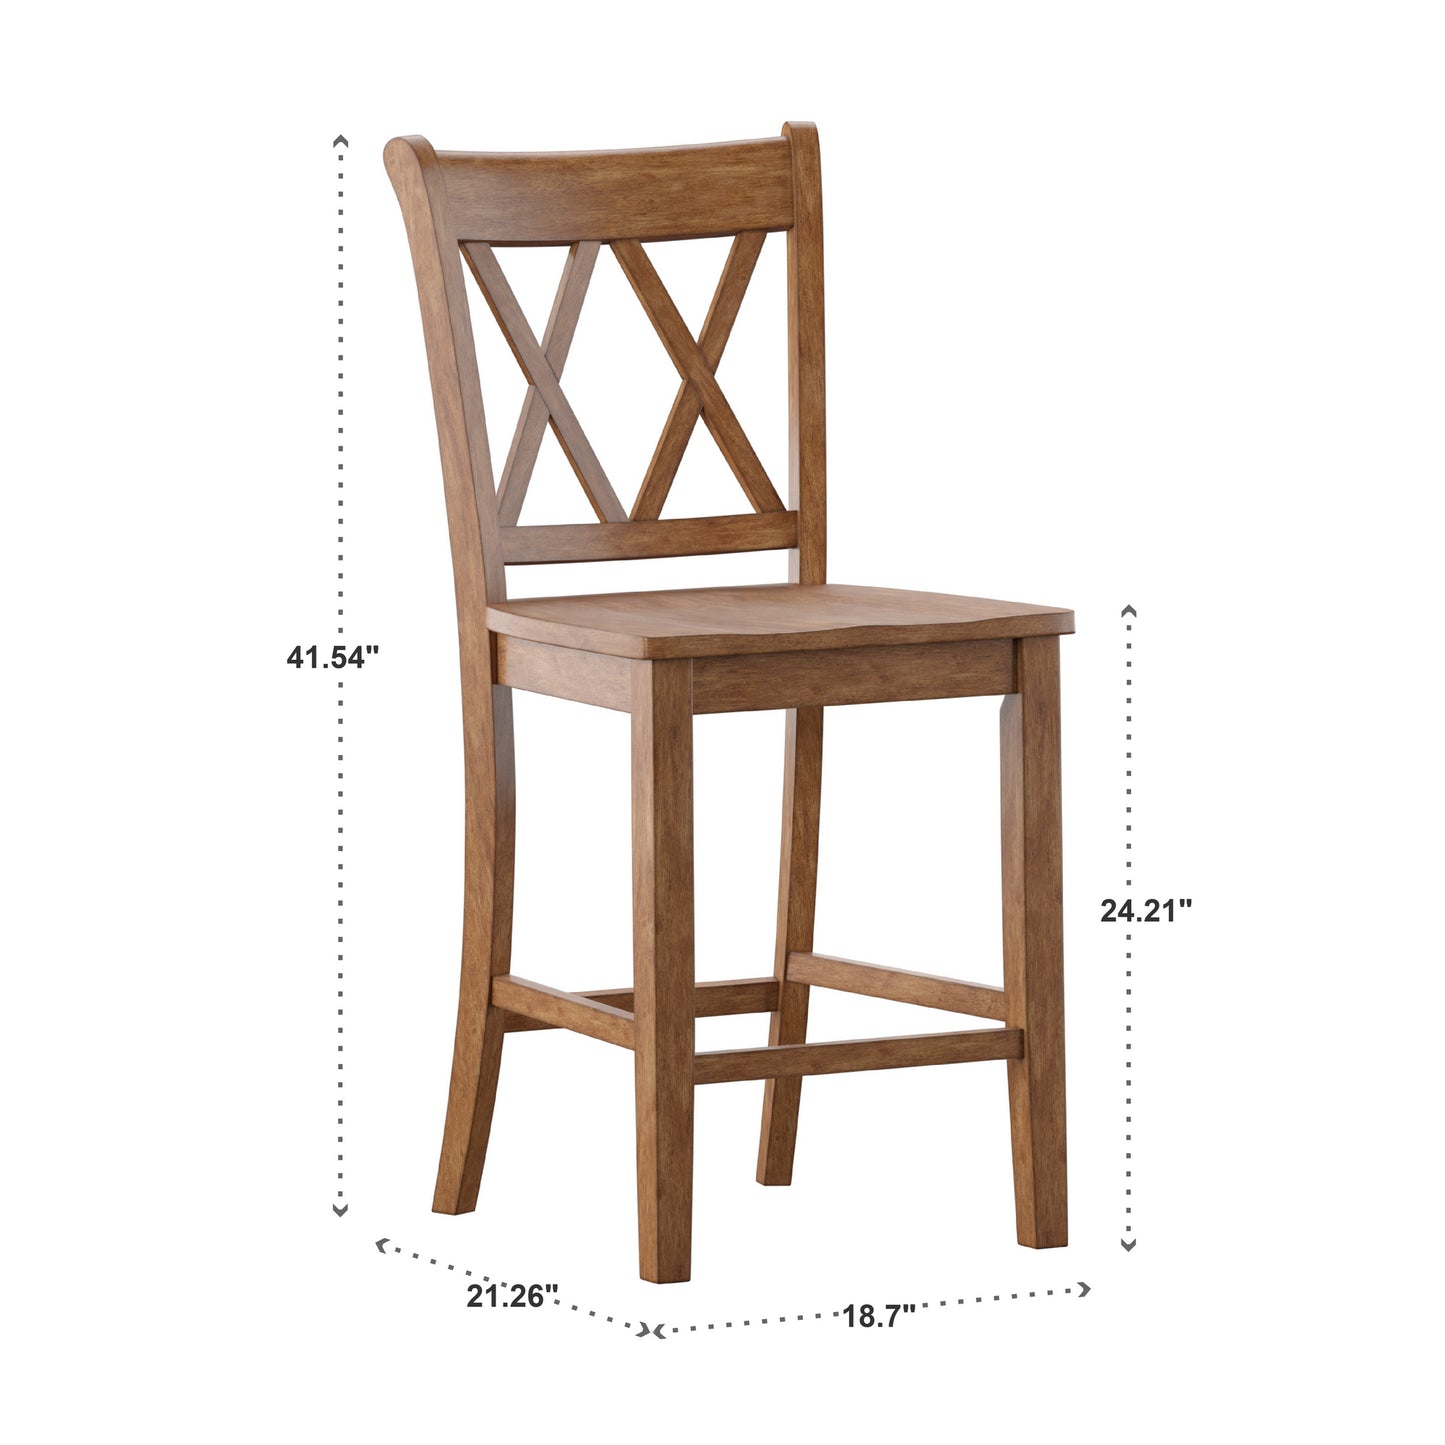 Double X-Back Counter Height Chairs (Set of 2) - Oak Finish